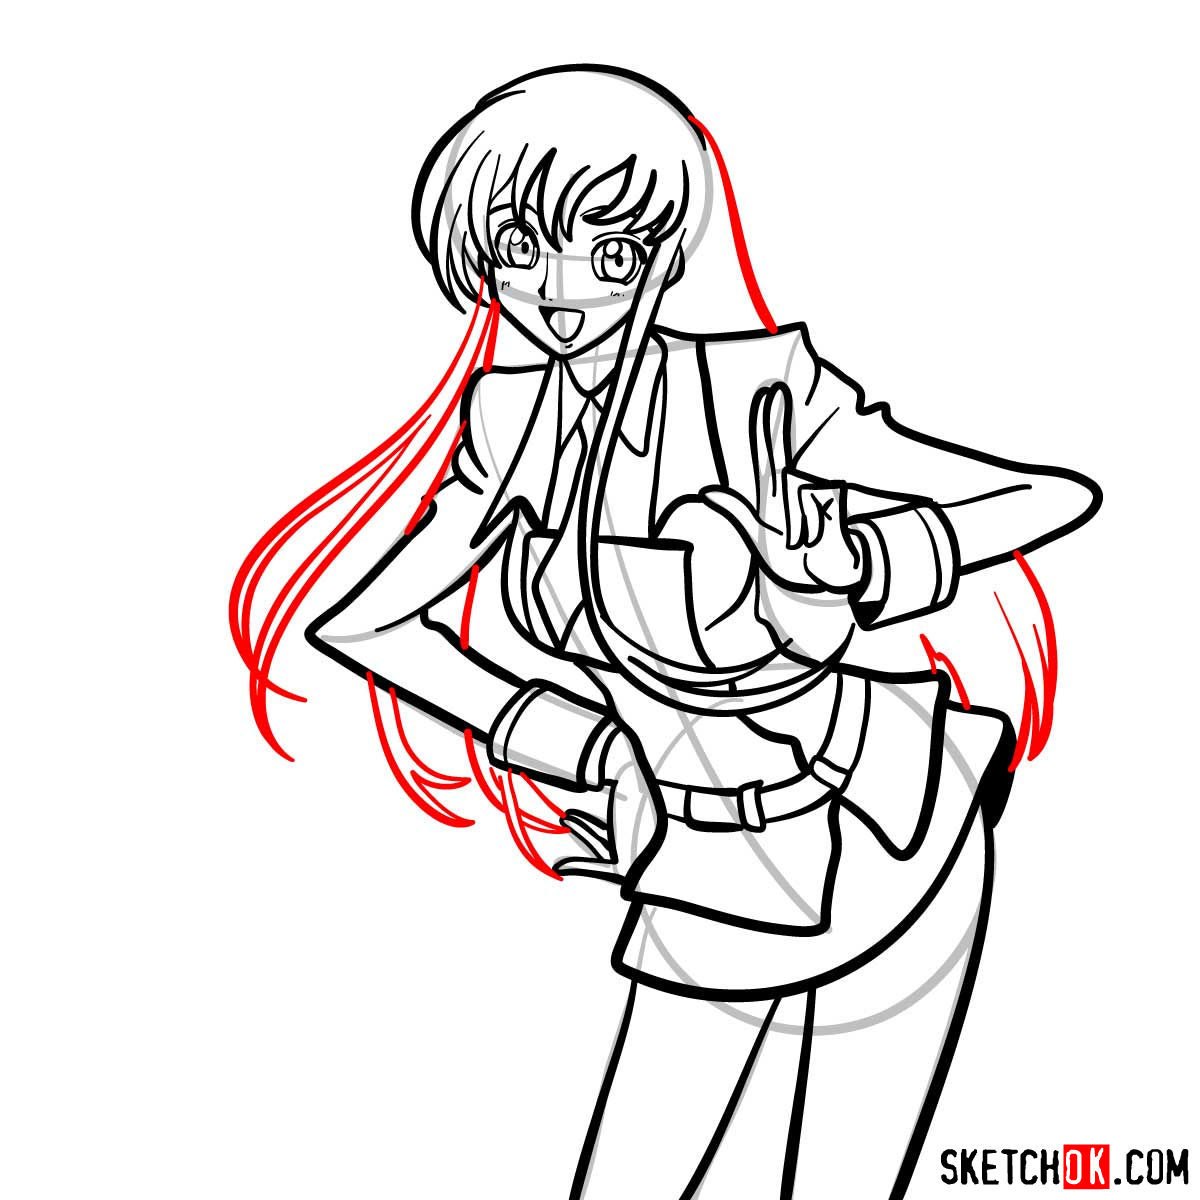 15 steps drawing guide of Shirley Fenette (Code Geass) - step 13